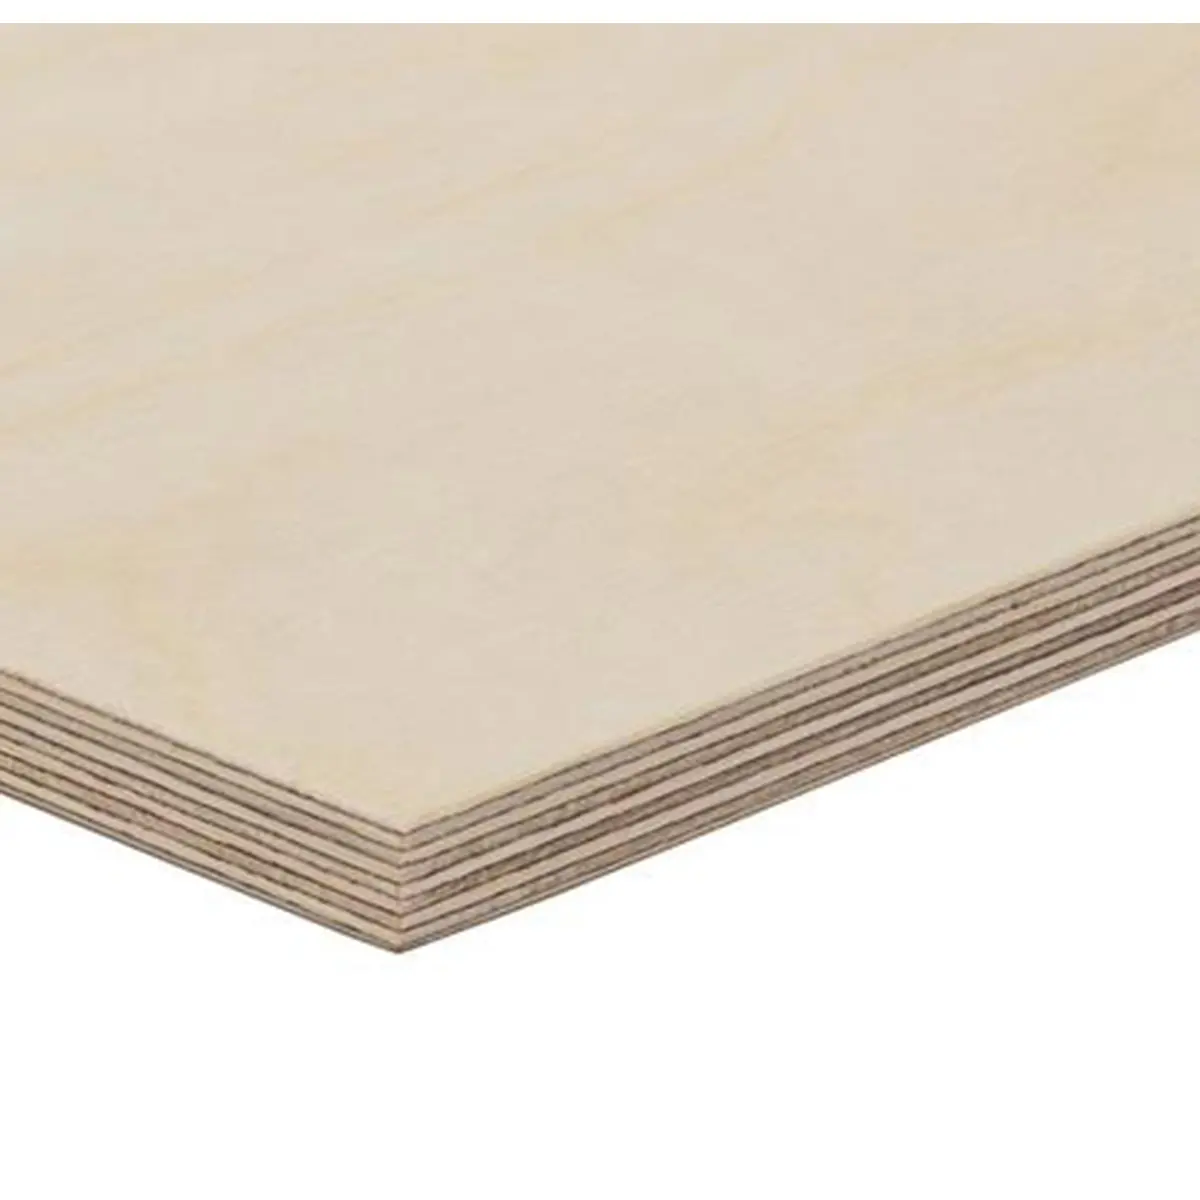 Great quality birch plywood FSF grade 9/15/21mm thickness worldwide shipping plywood